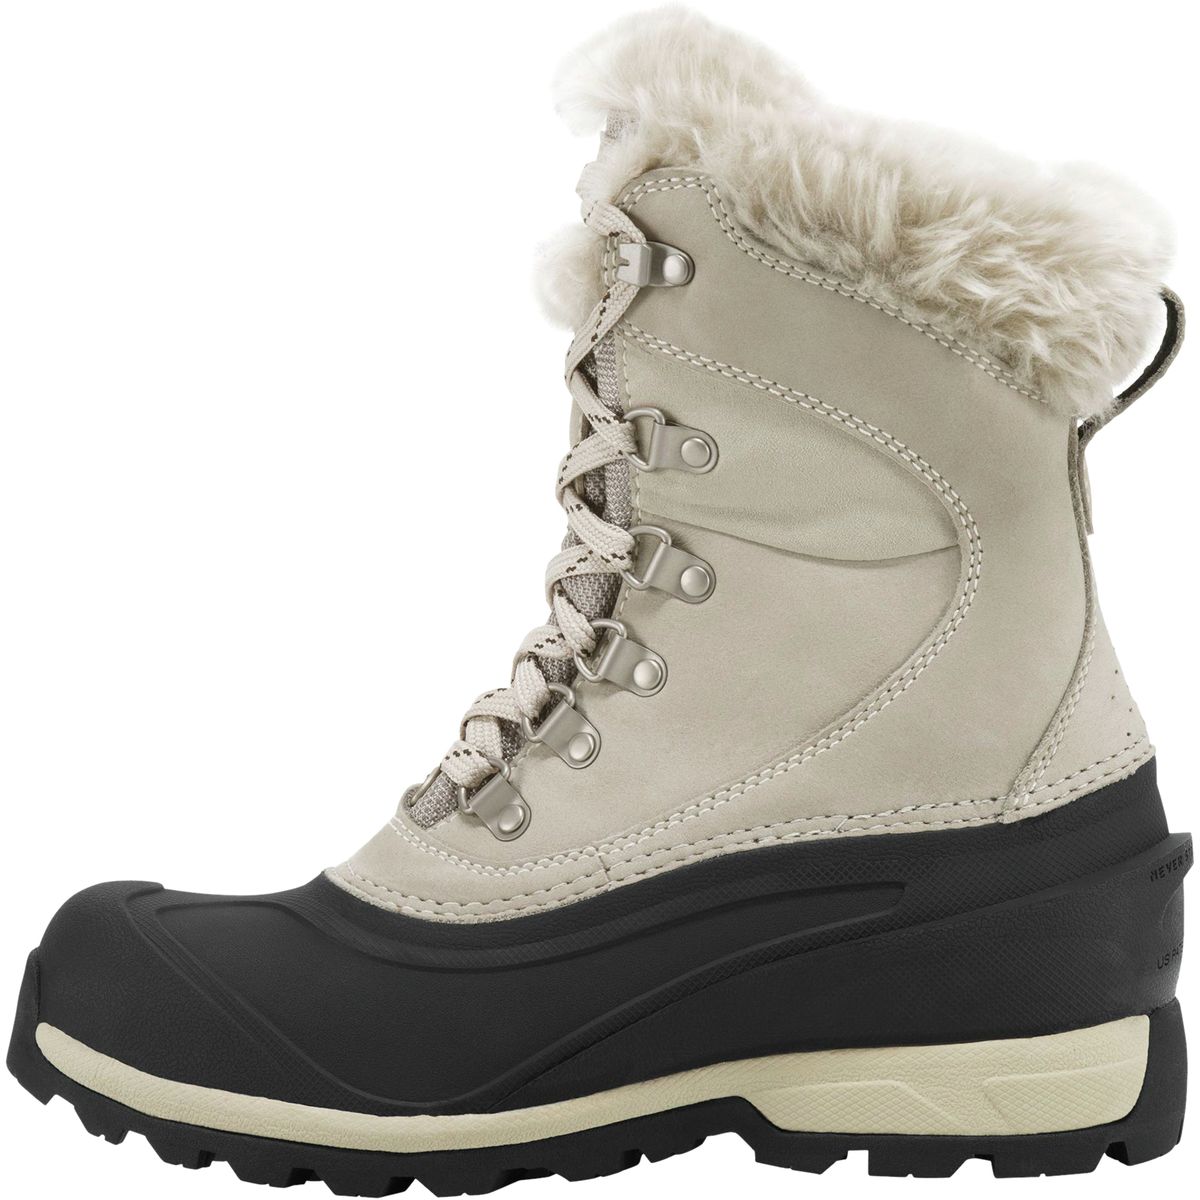 north face chilkat 400 boots